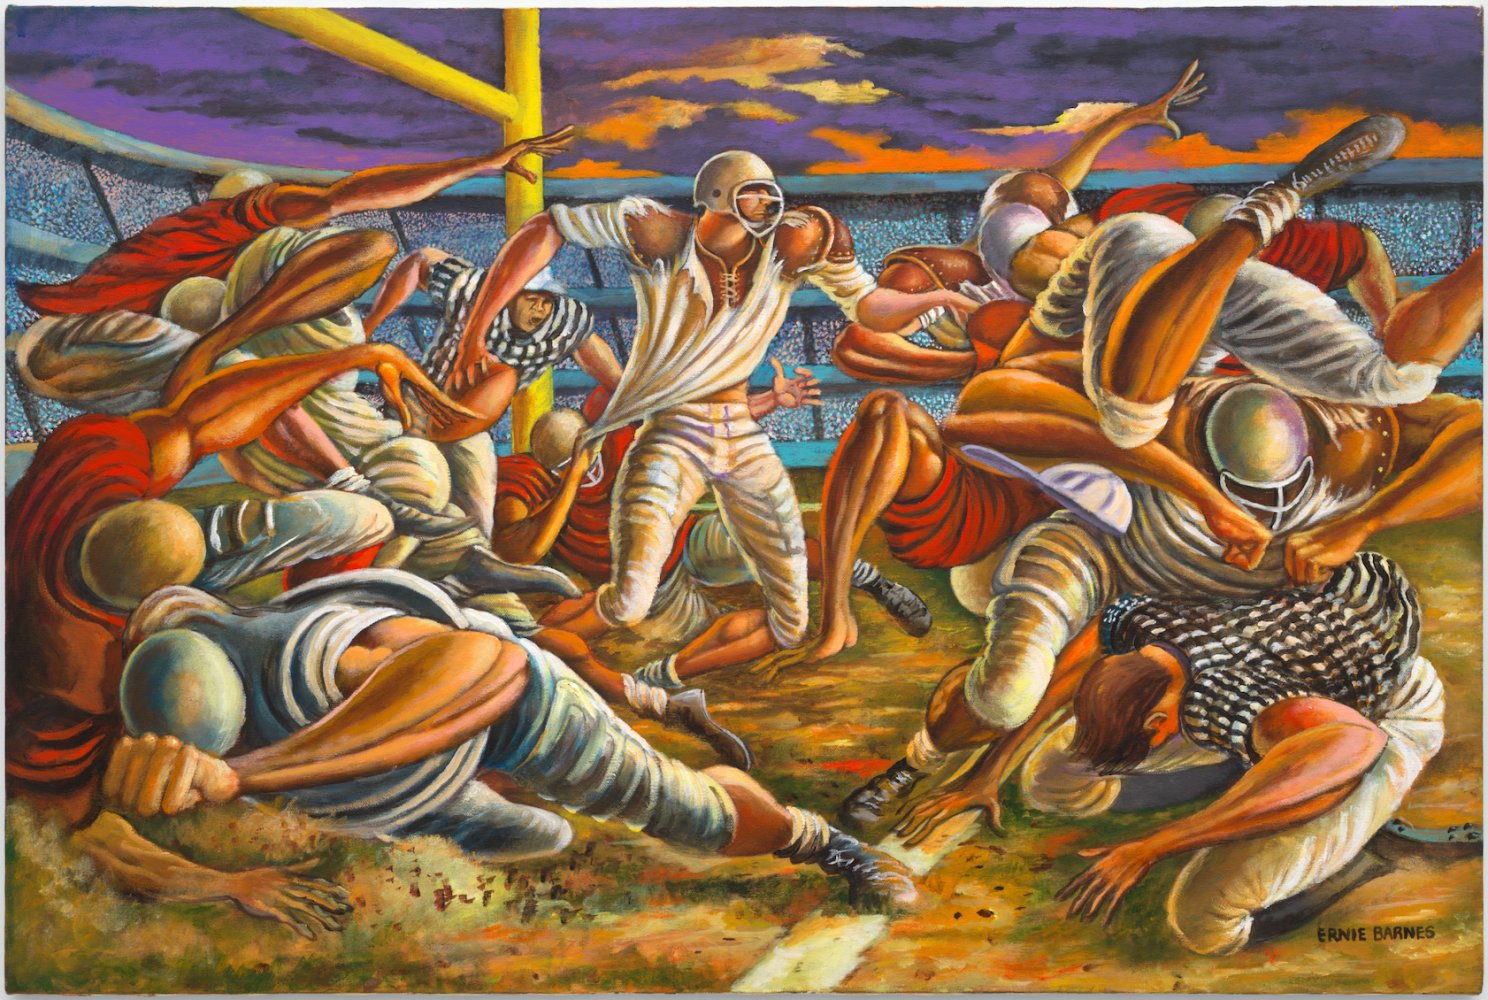 About the Artwork   by Ernie Barnes